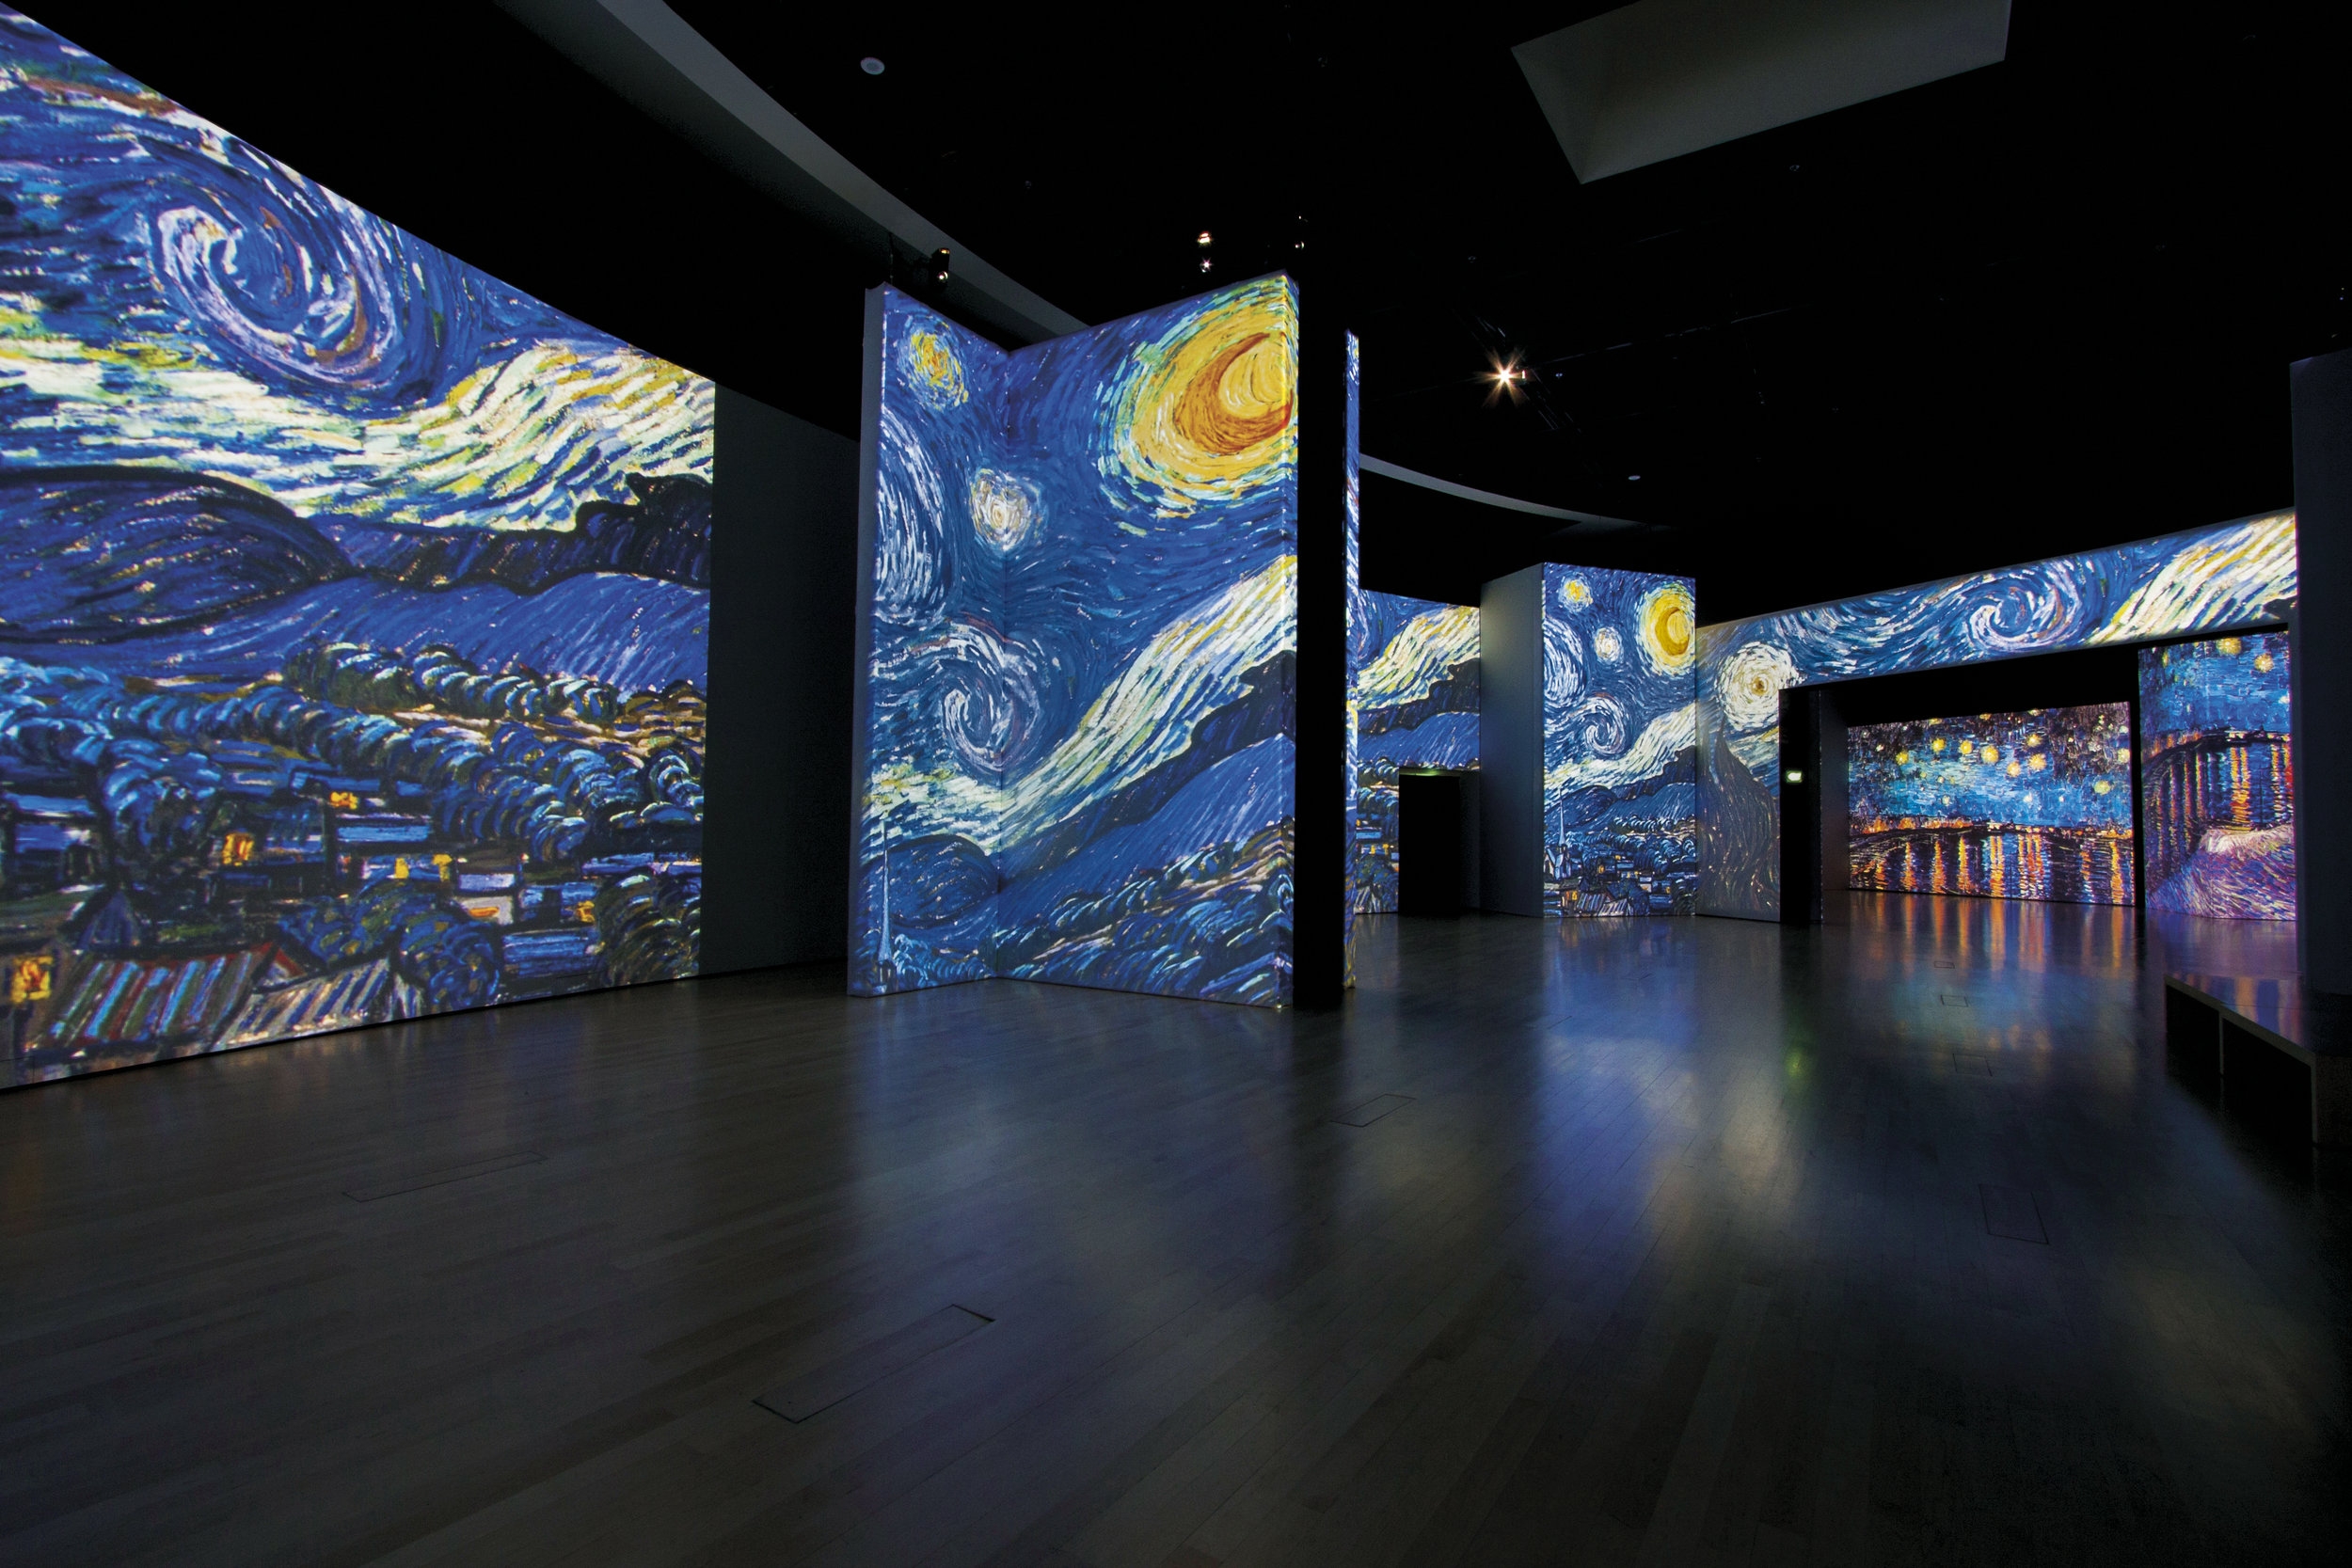  The Starry Night created in 1889 when the artist was a patient at an asylum at Saint-Remy-de-Provence is seen here cast on floor-to-ceiling screens by 40 high definition projectors.&nbsp; 